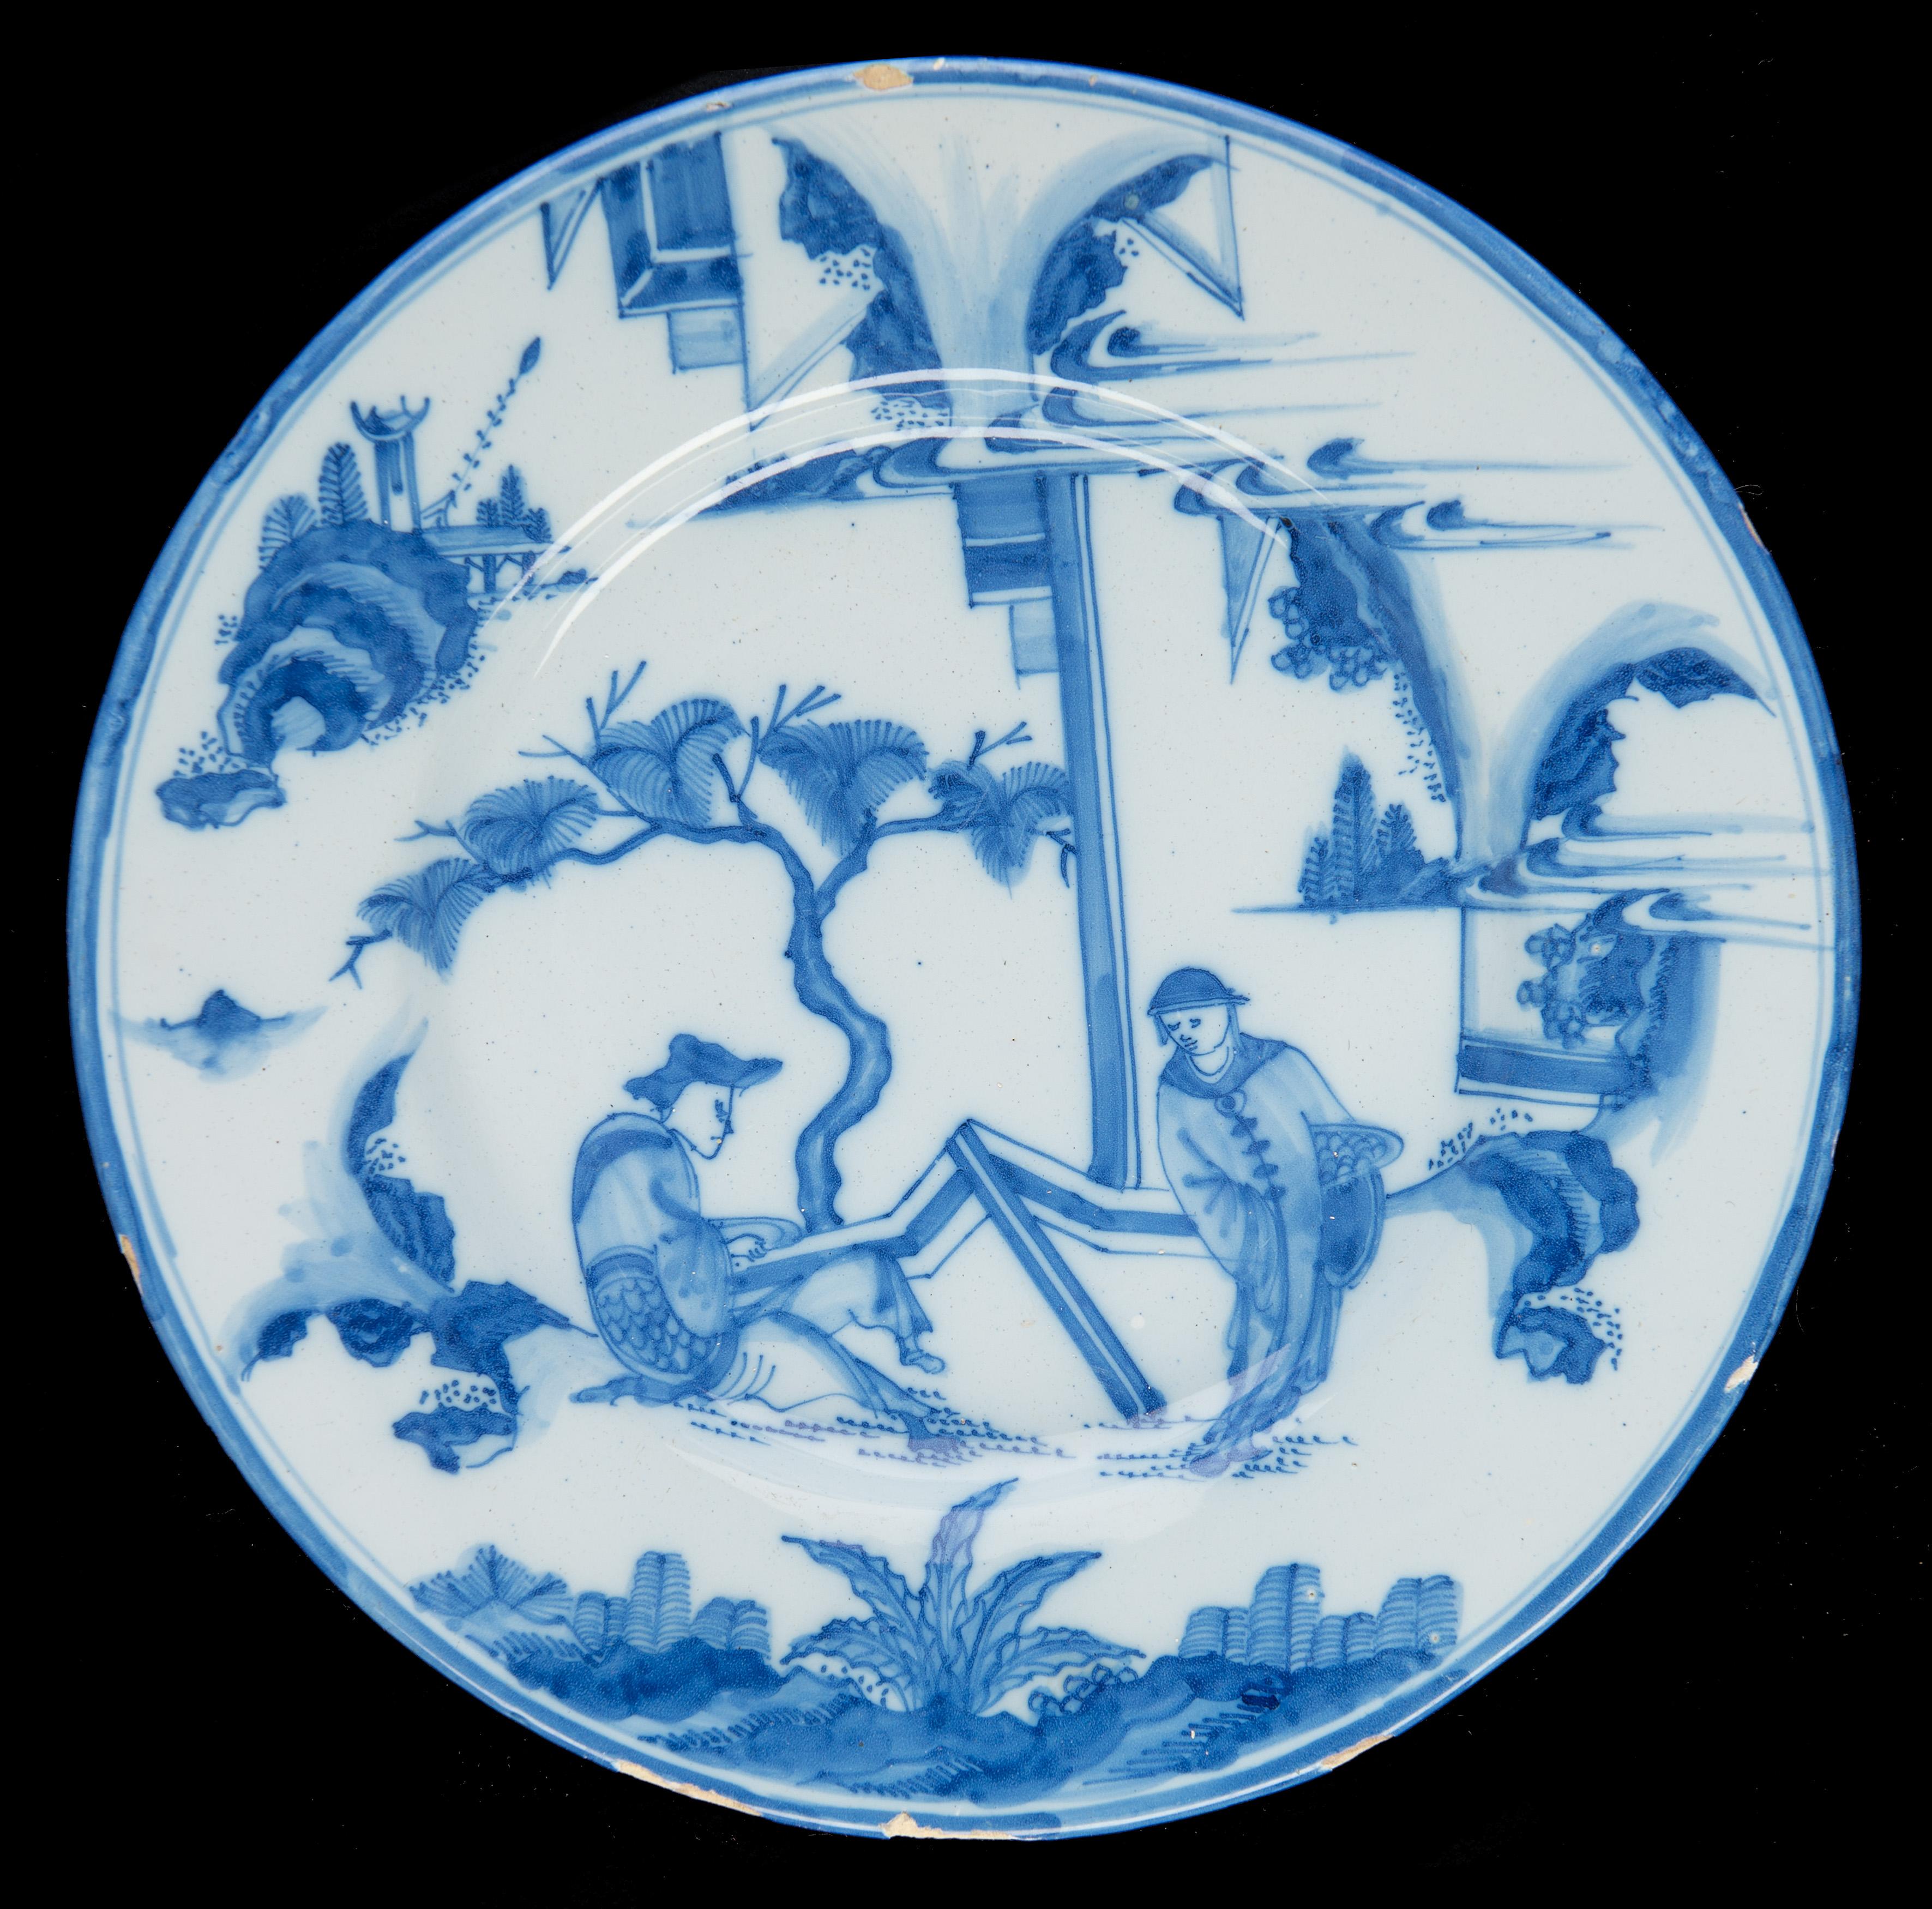 Dish with a wide-spreading flange, the surface painted entirely with a blue and white chinoiserie decoration of two men in a garden-like landscape. Both men carry a dish, and on the dish of the standing man lies round fruit. The rim is executed in